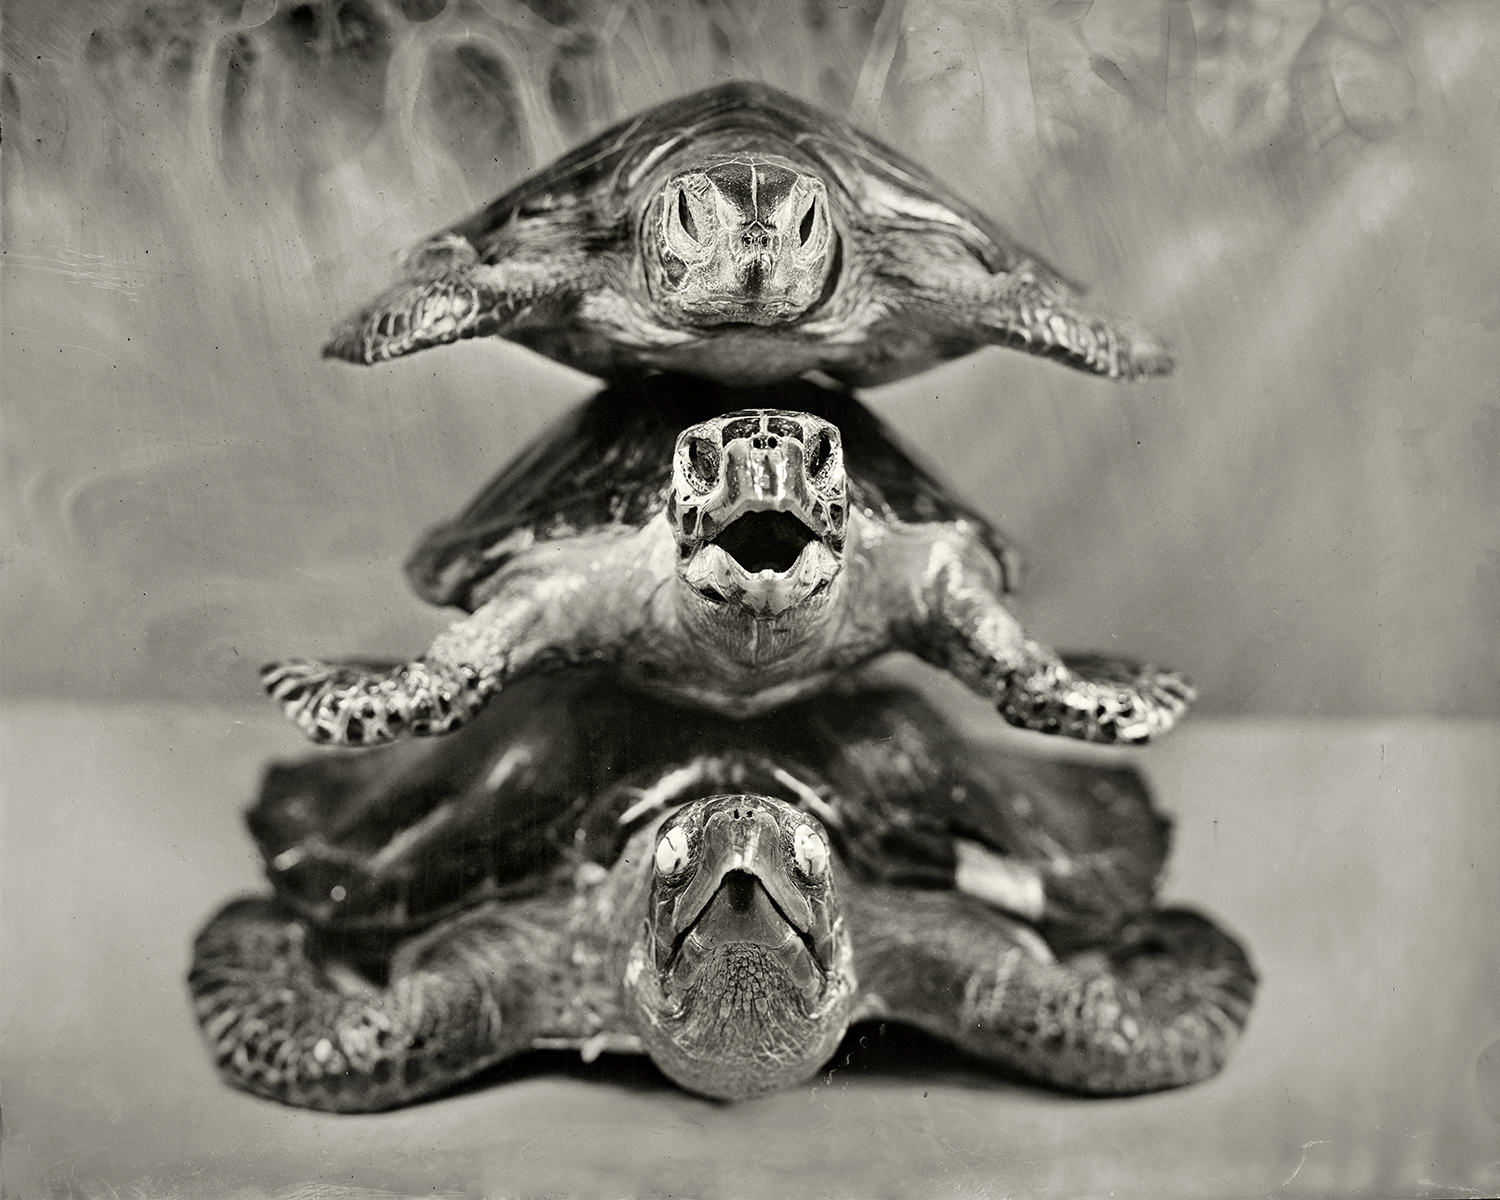 Stacked Turtles, 2018, 2018, 8x10 inch Tintype